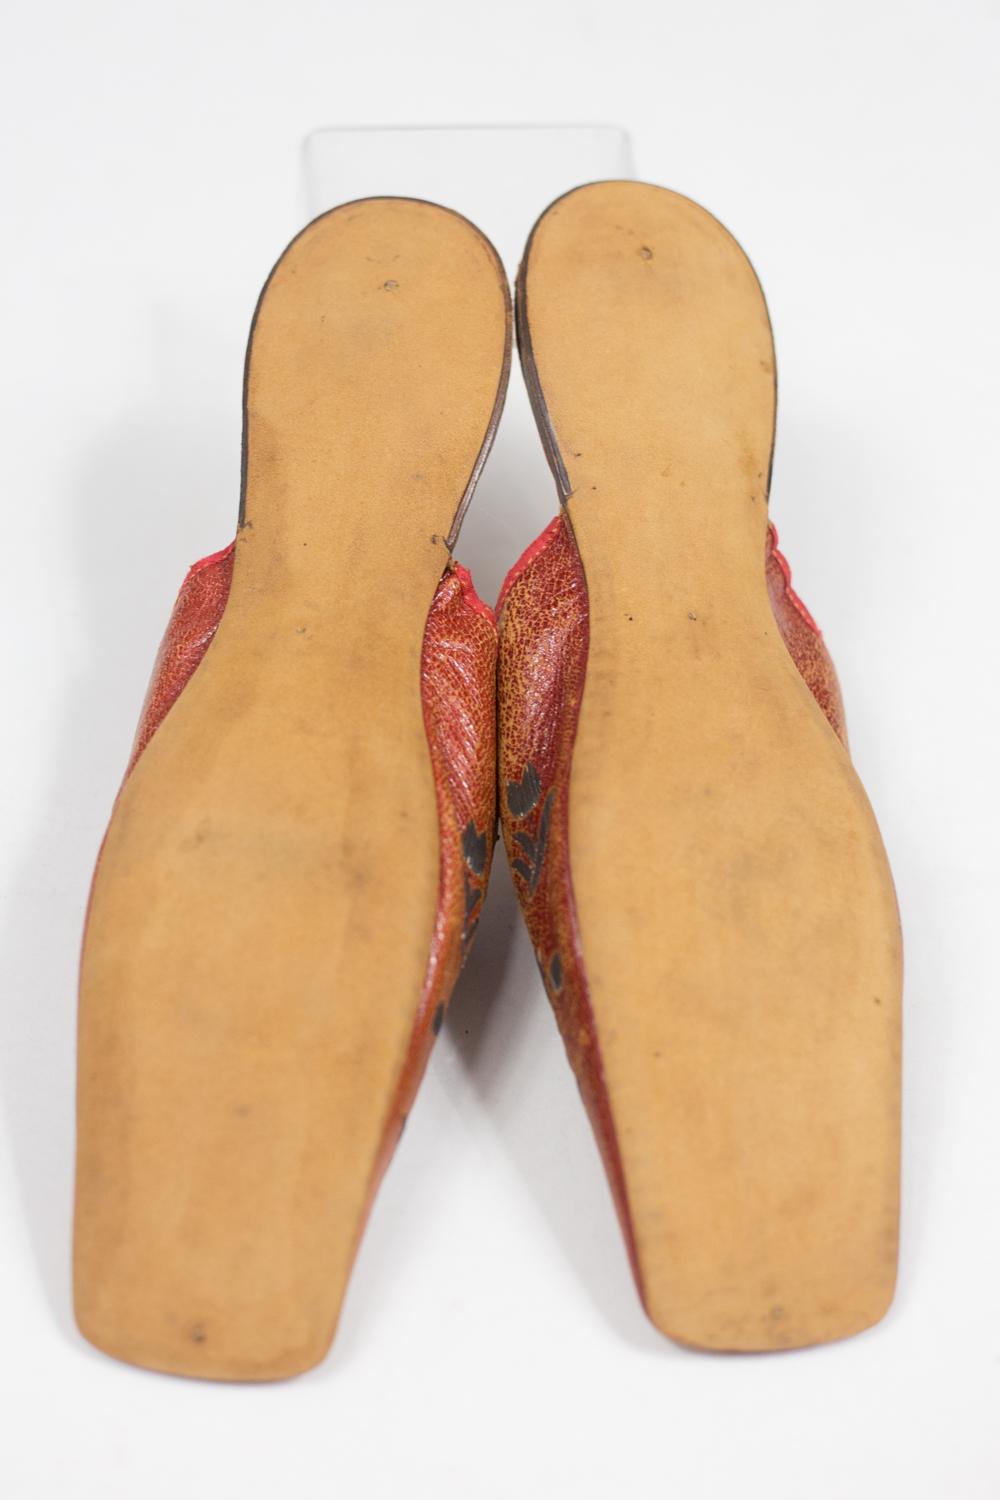 Pair Of Leather Slippers Embroidered With Tulips - France Early 19c In Good Condition For Sale In Toulon, FR